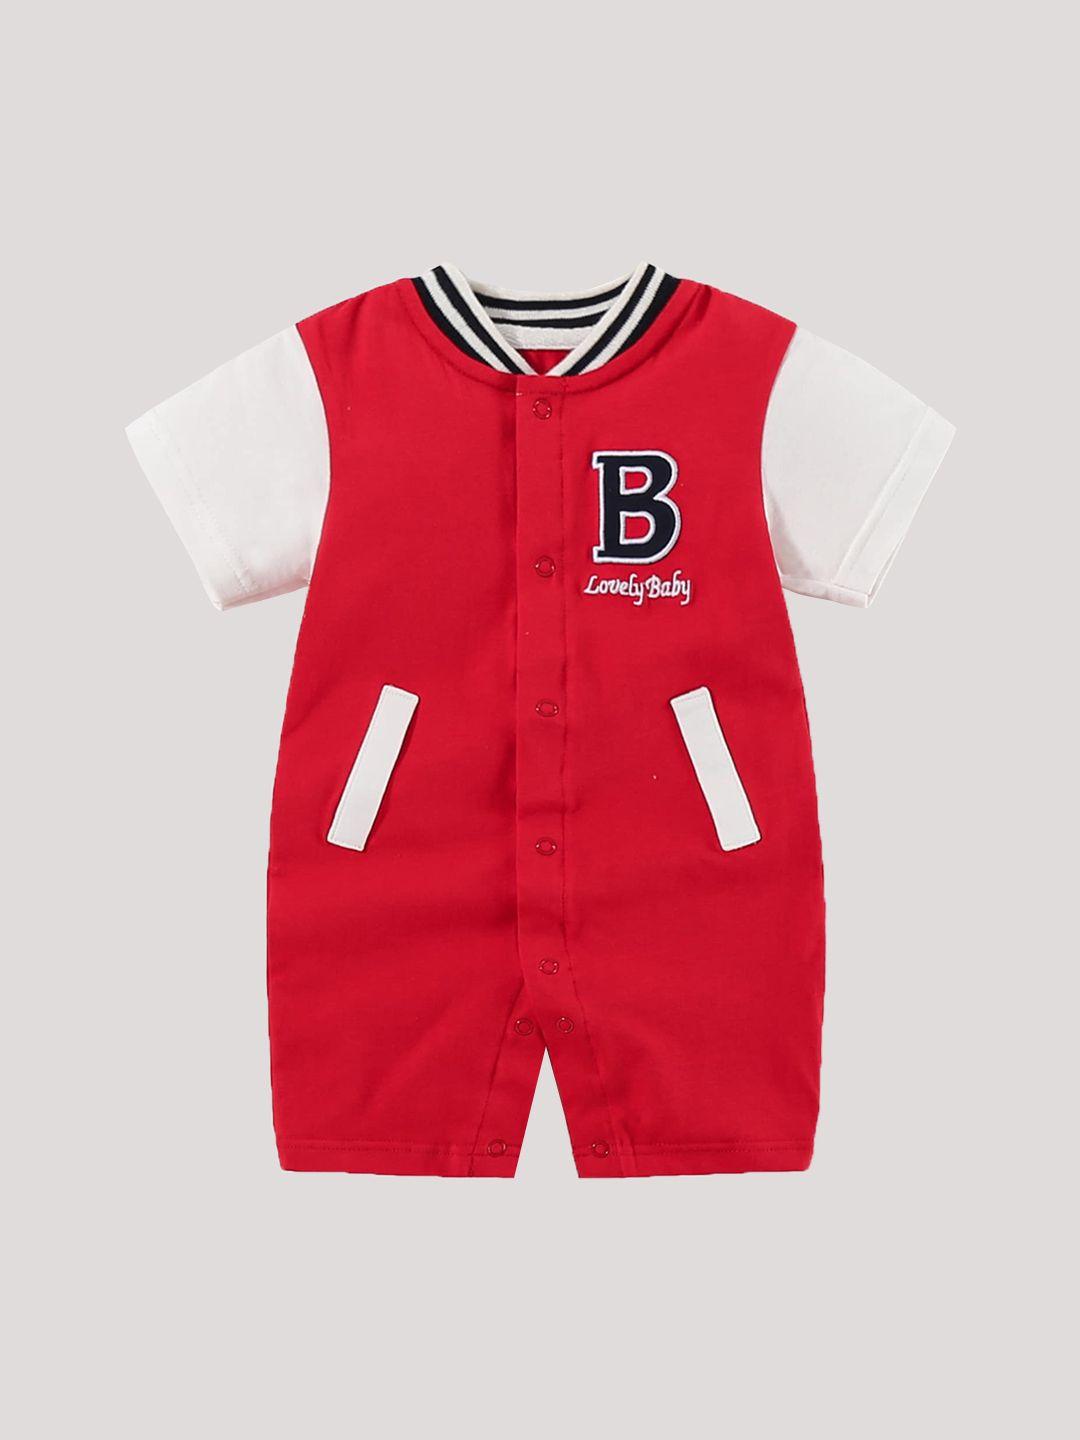 stylecast infant boys red printed cotton rompers